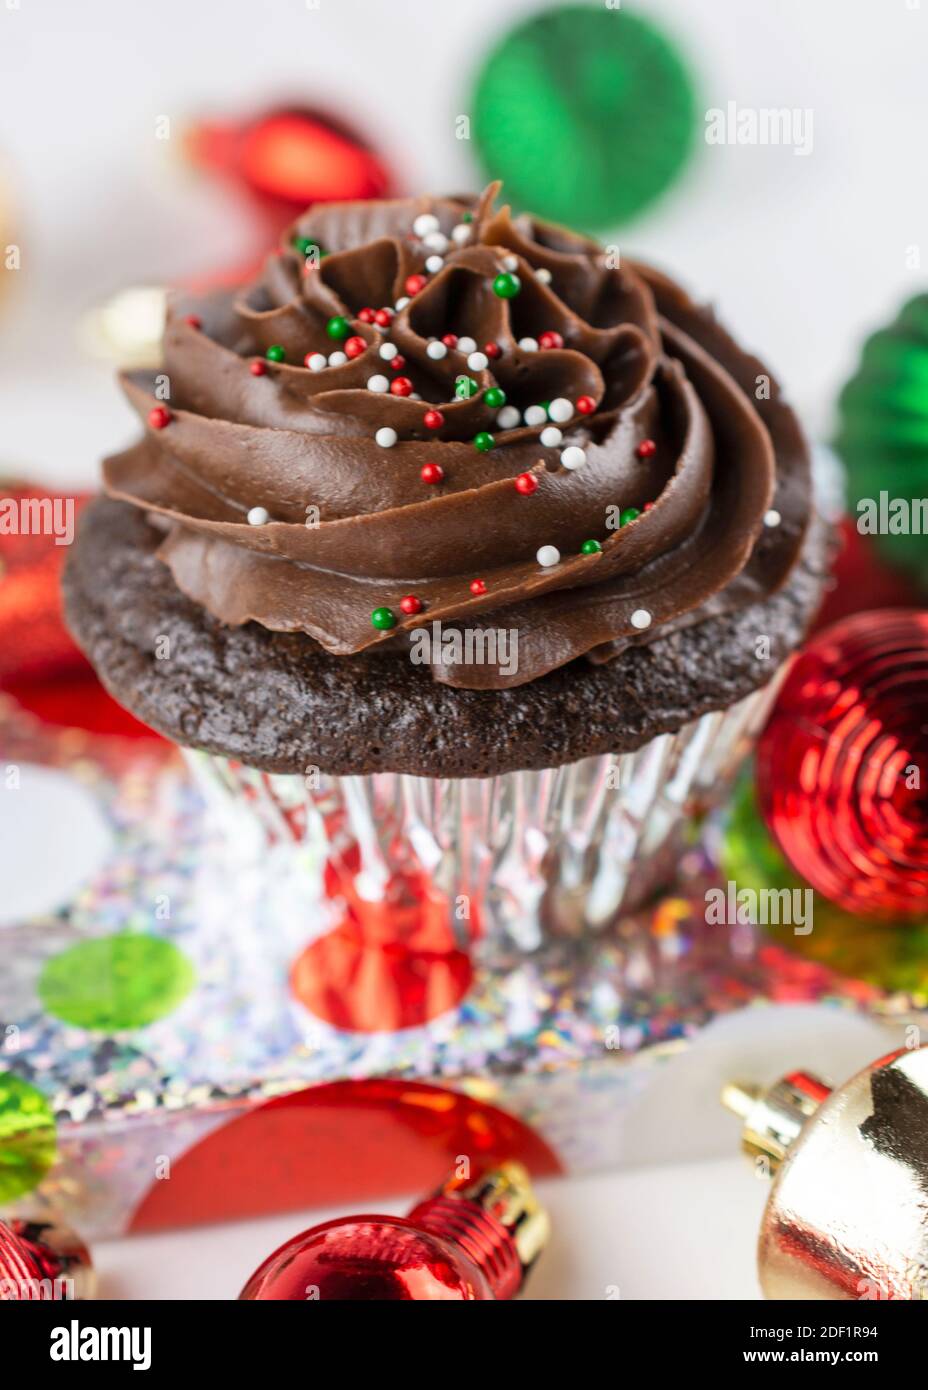 A Chocolate Christmas cupcake sits on a wrapped present surrounded by green, gold, and red ornaments.  White background. Stock Photo